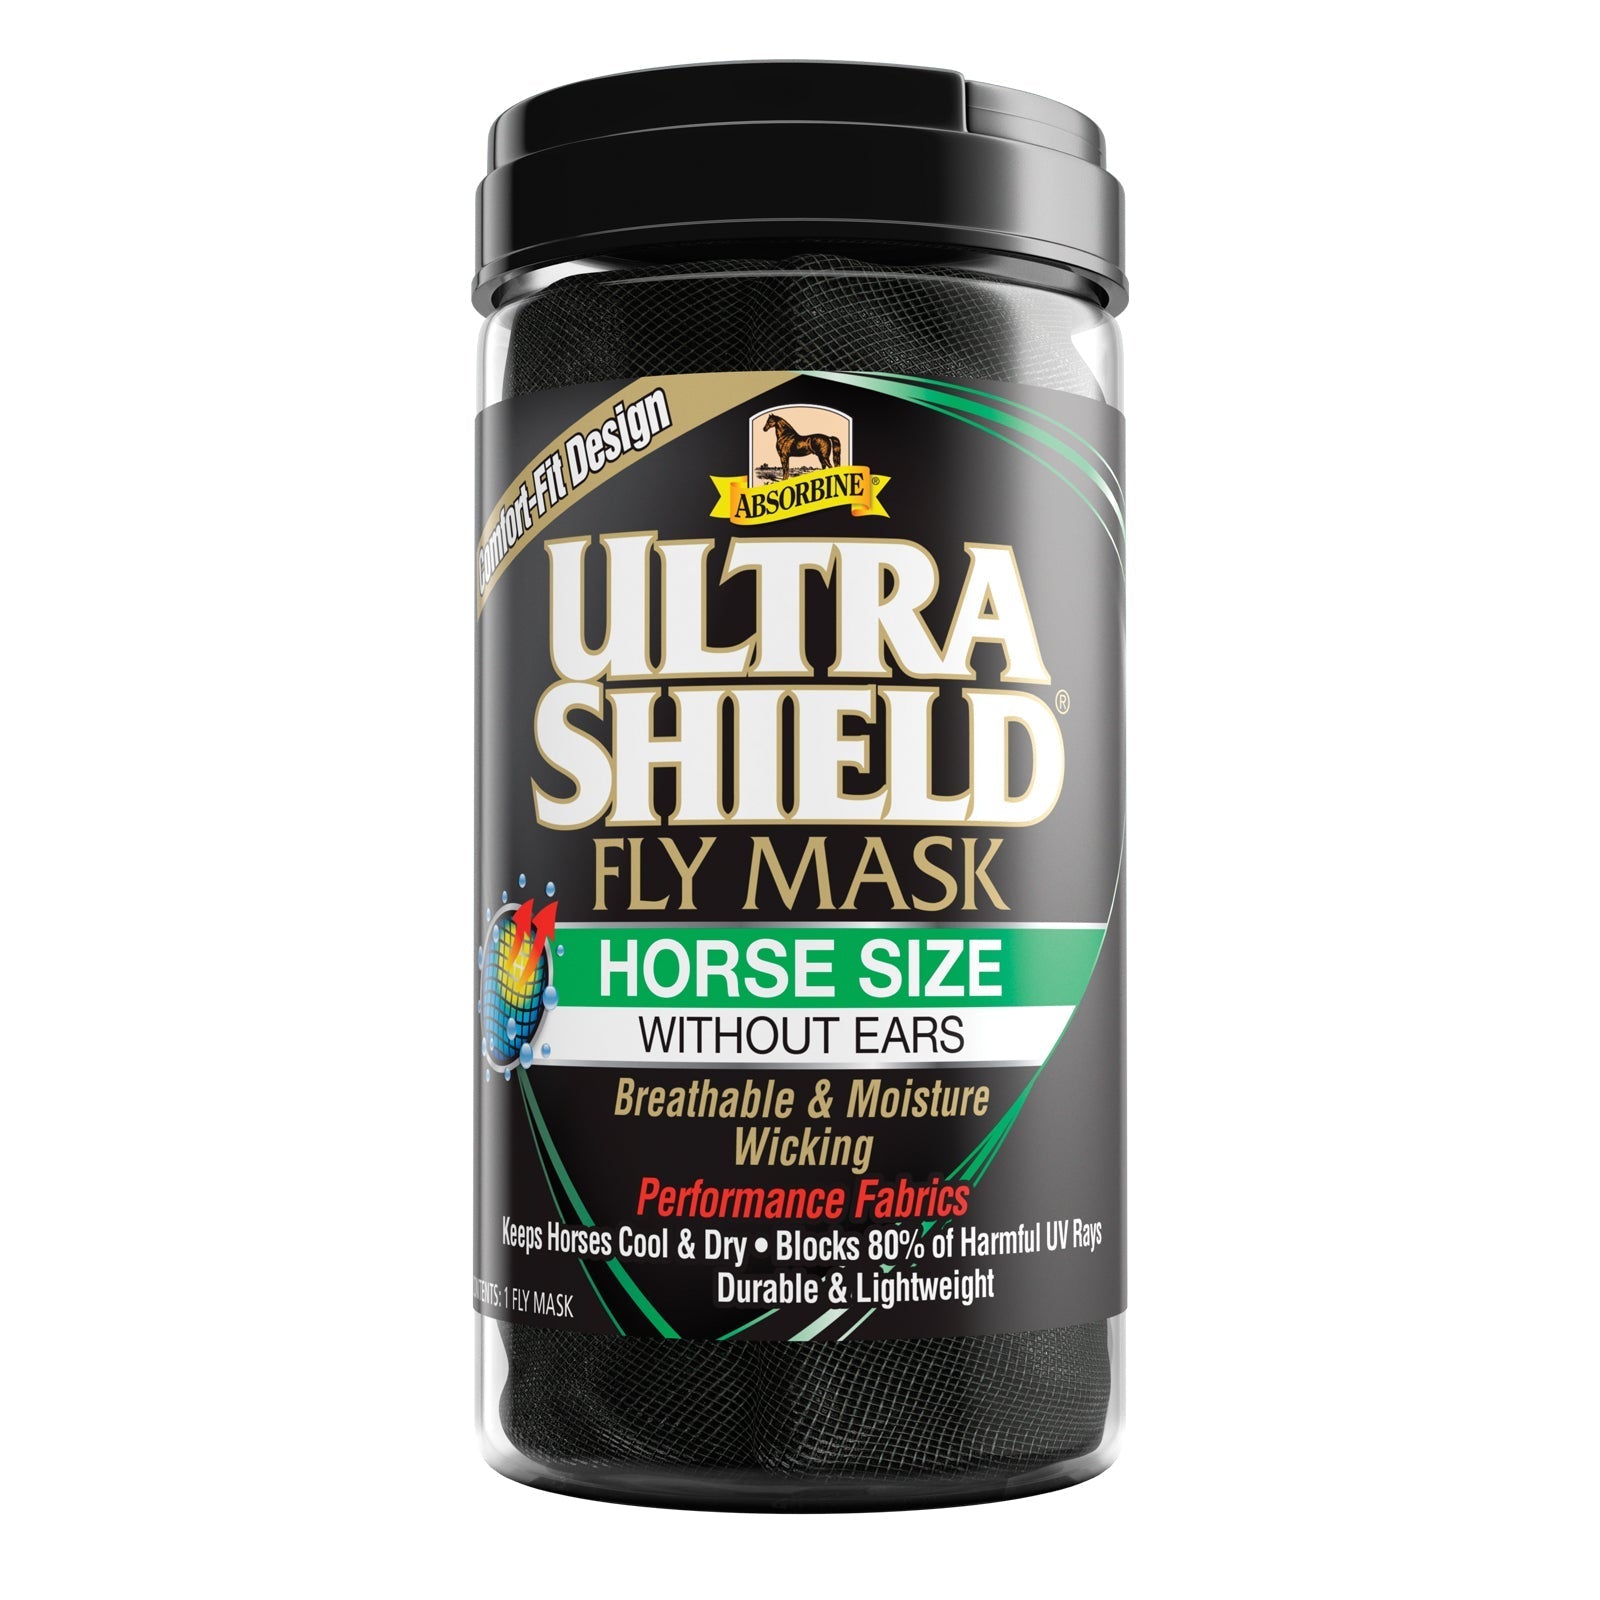 ABSORBINE, Absorbine Products Ultrashield Fly Mask Without Ears Horse